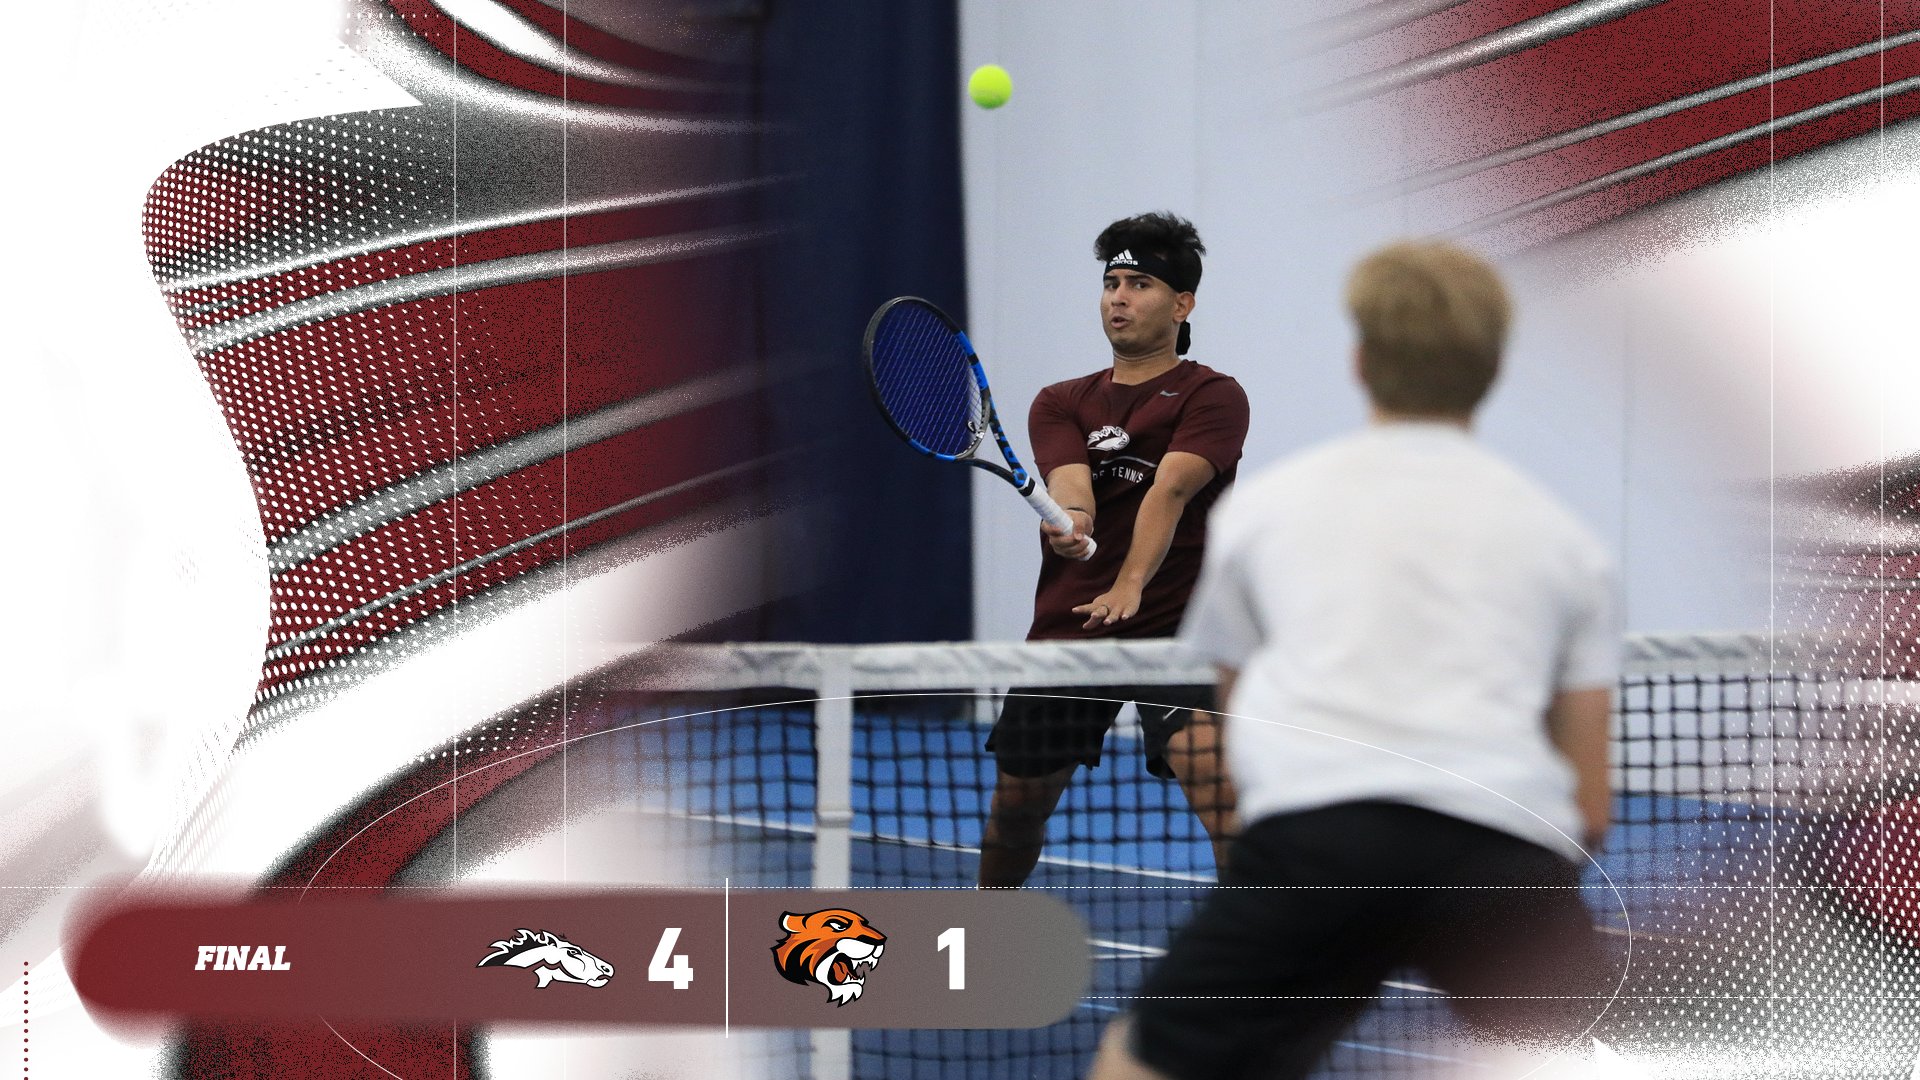 Morningside men advance to GPAC Championship with 4-1 win over Doane